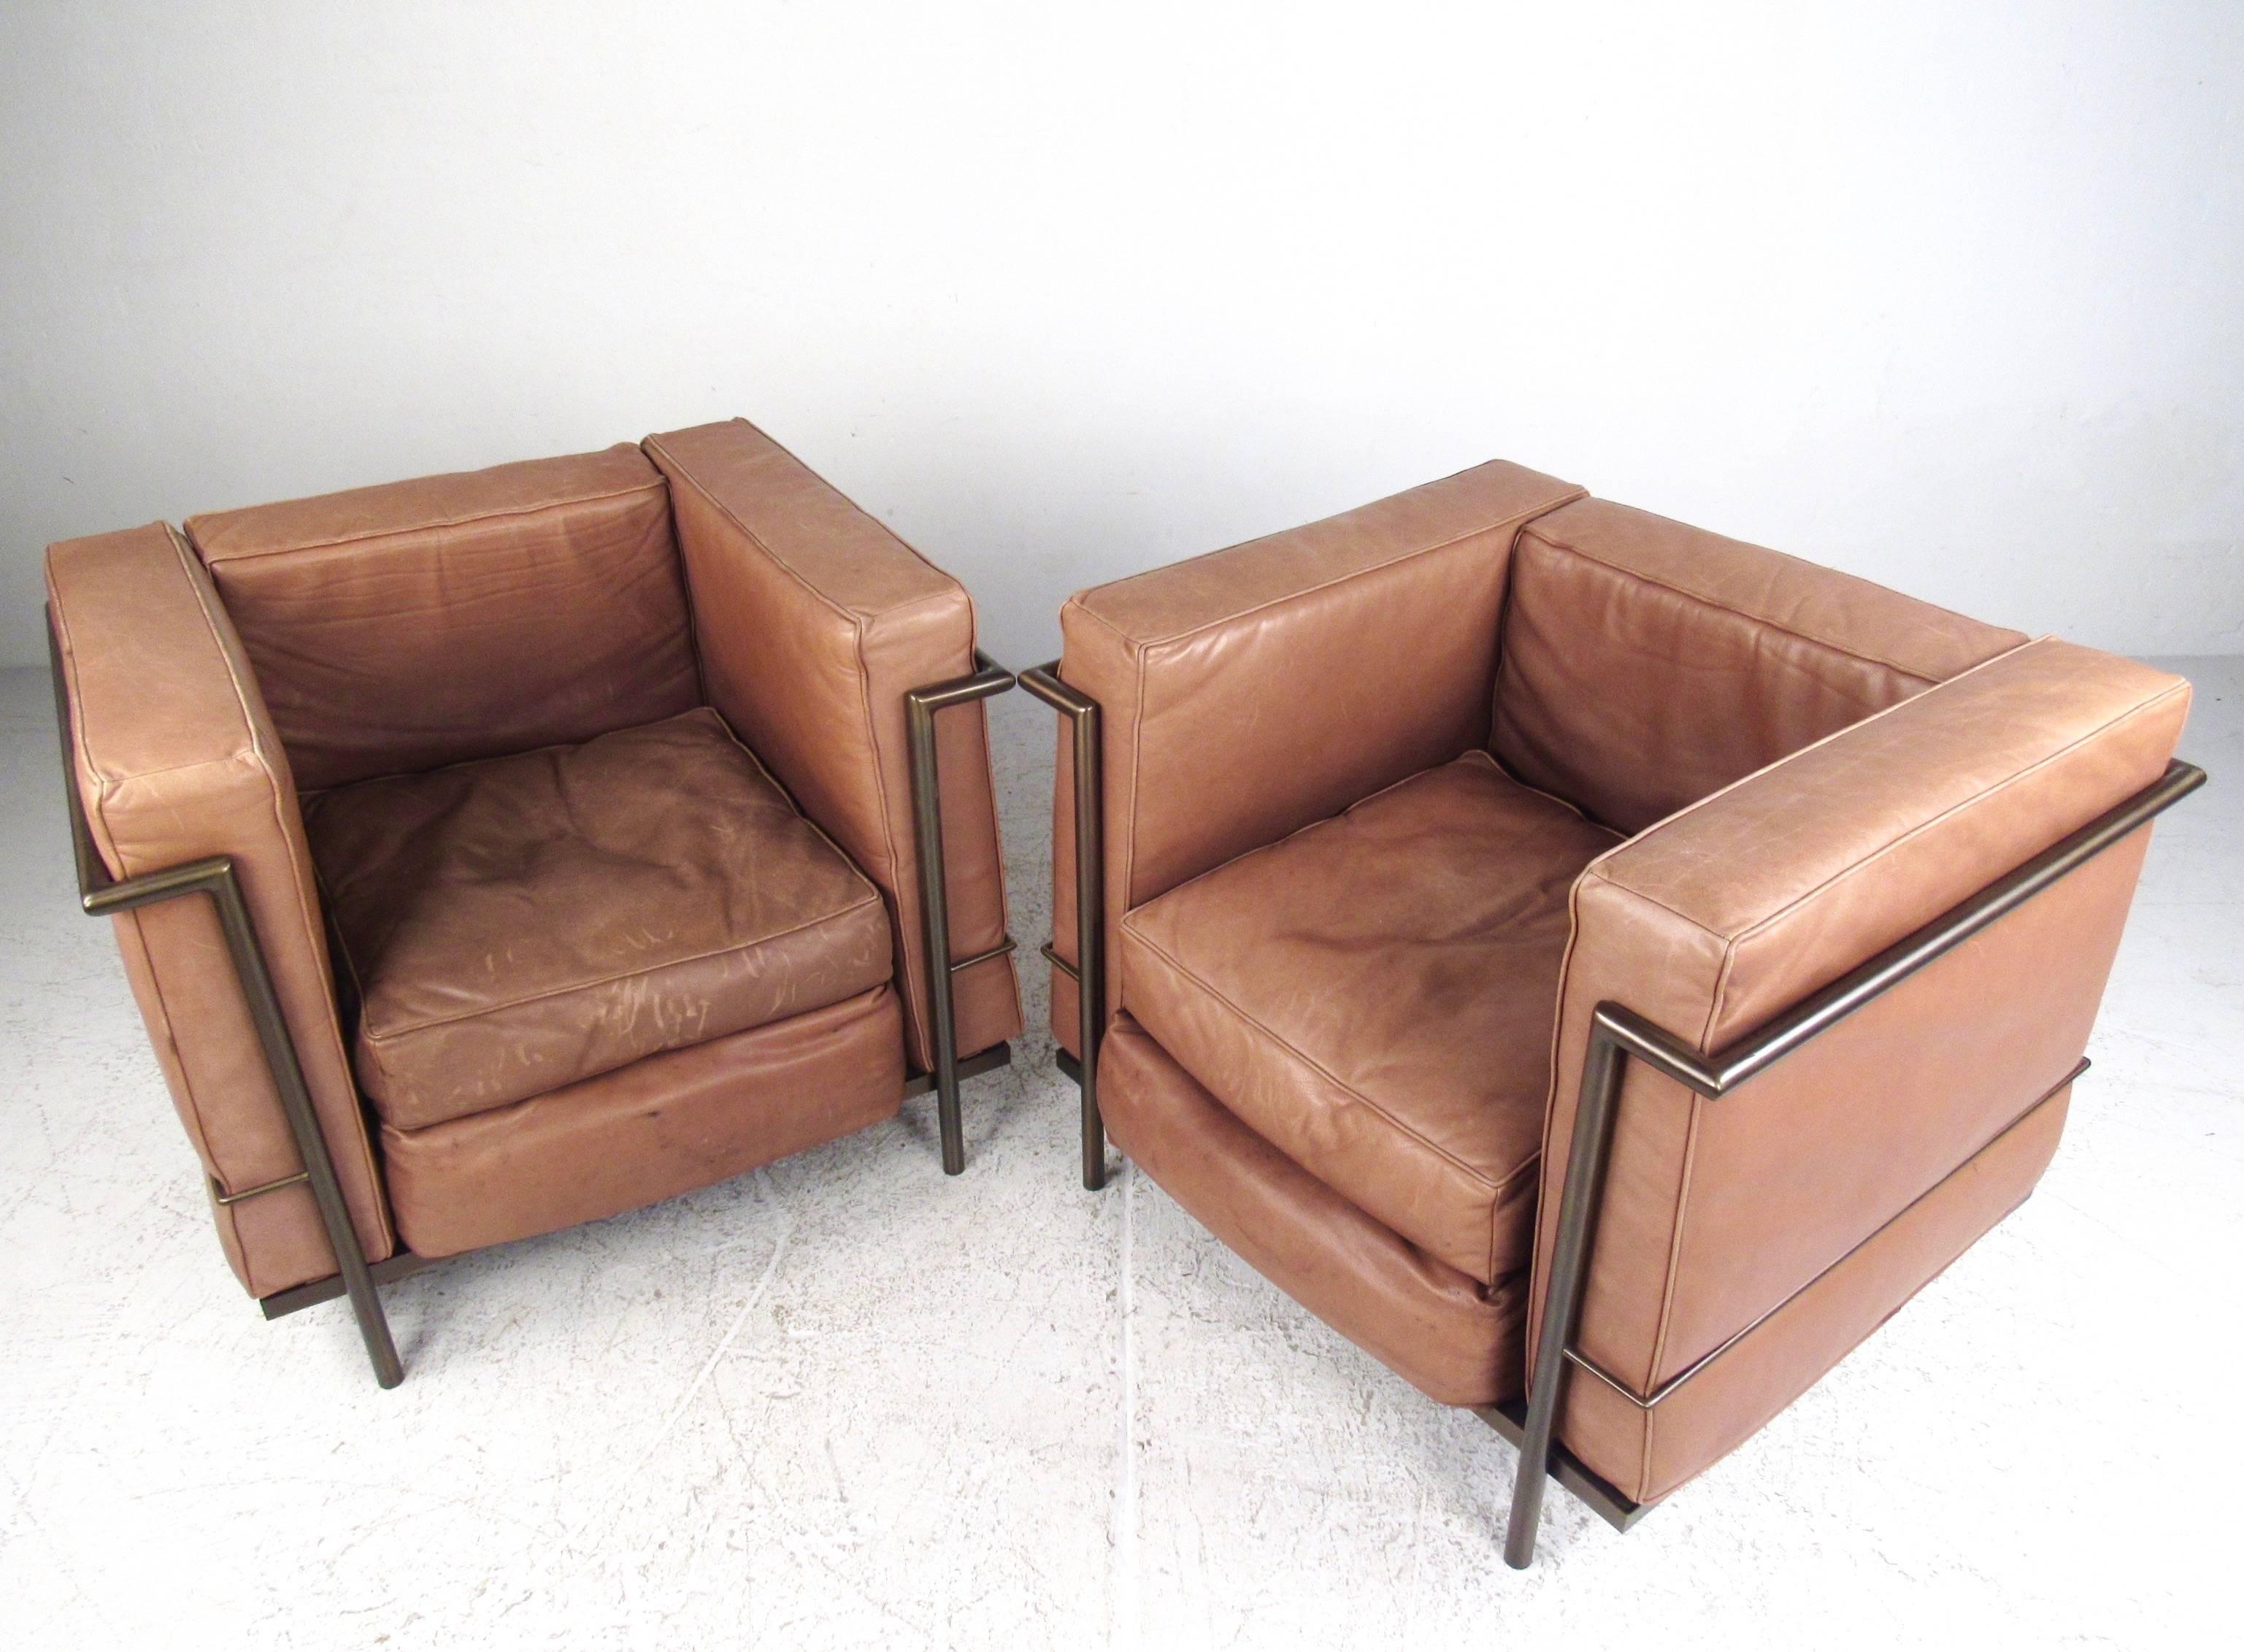 This stylish pair of vintage leather club chairs feature Le Corbusier LC2 style design, including five cushion seats, with polished brass finish metal frame. Wonderful mix of modern aesthetics and vintage style, the lightly worn overstuffed leather